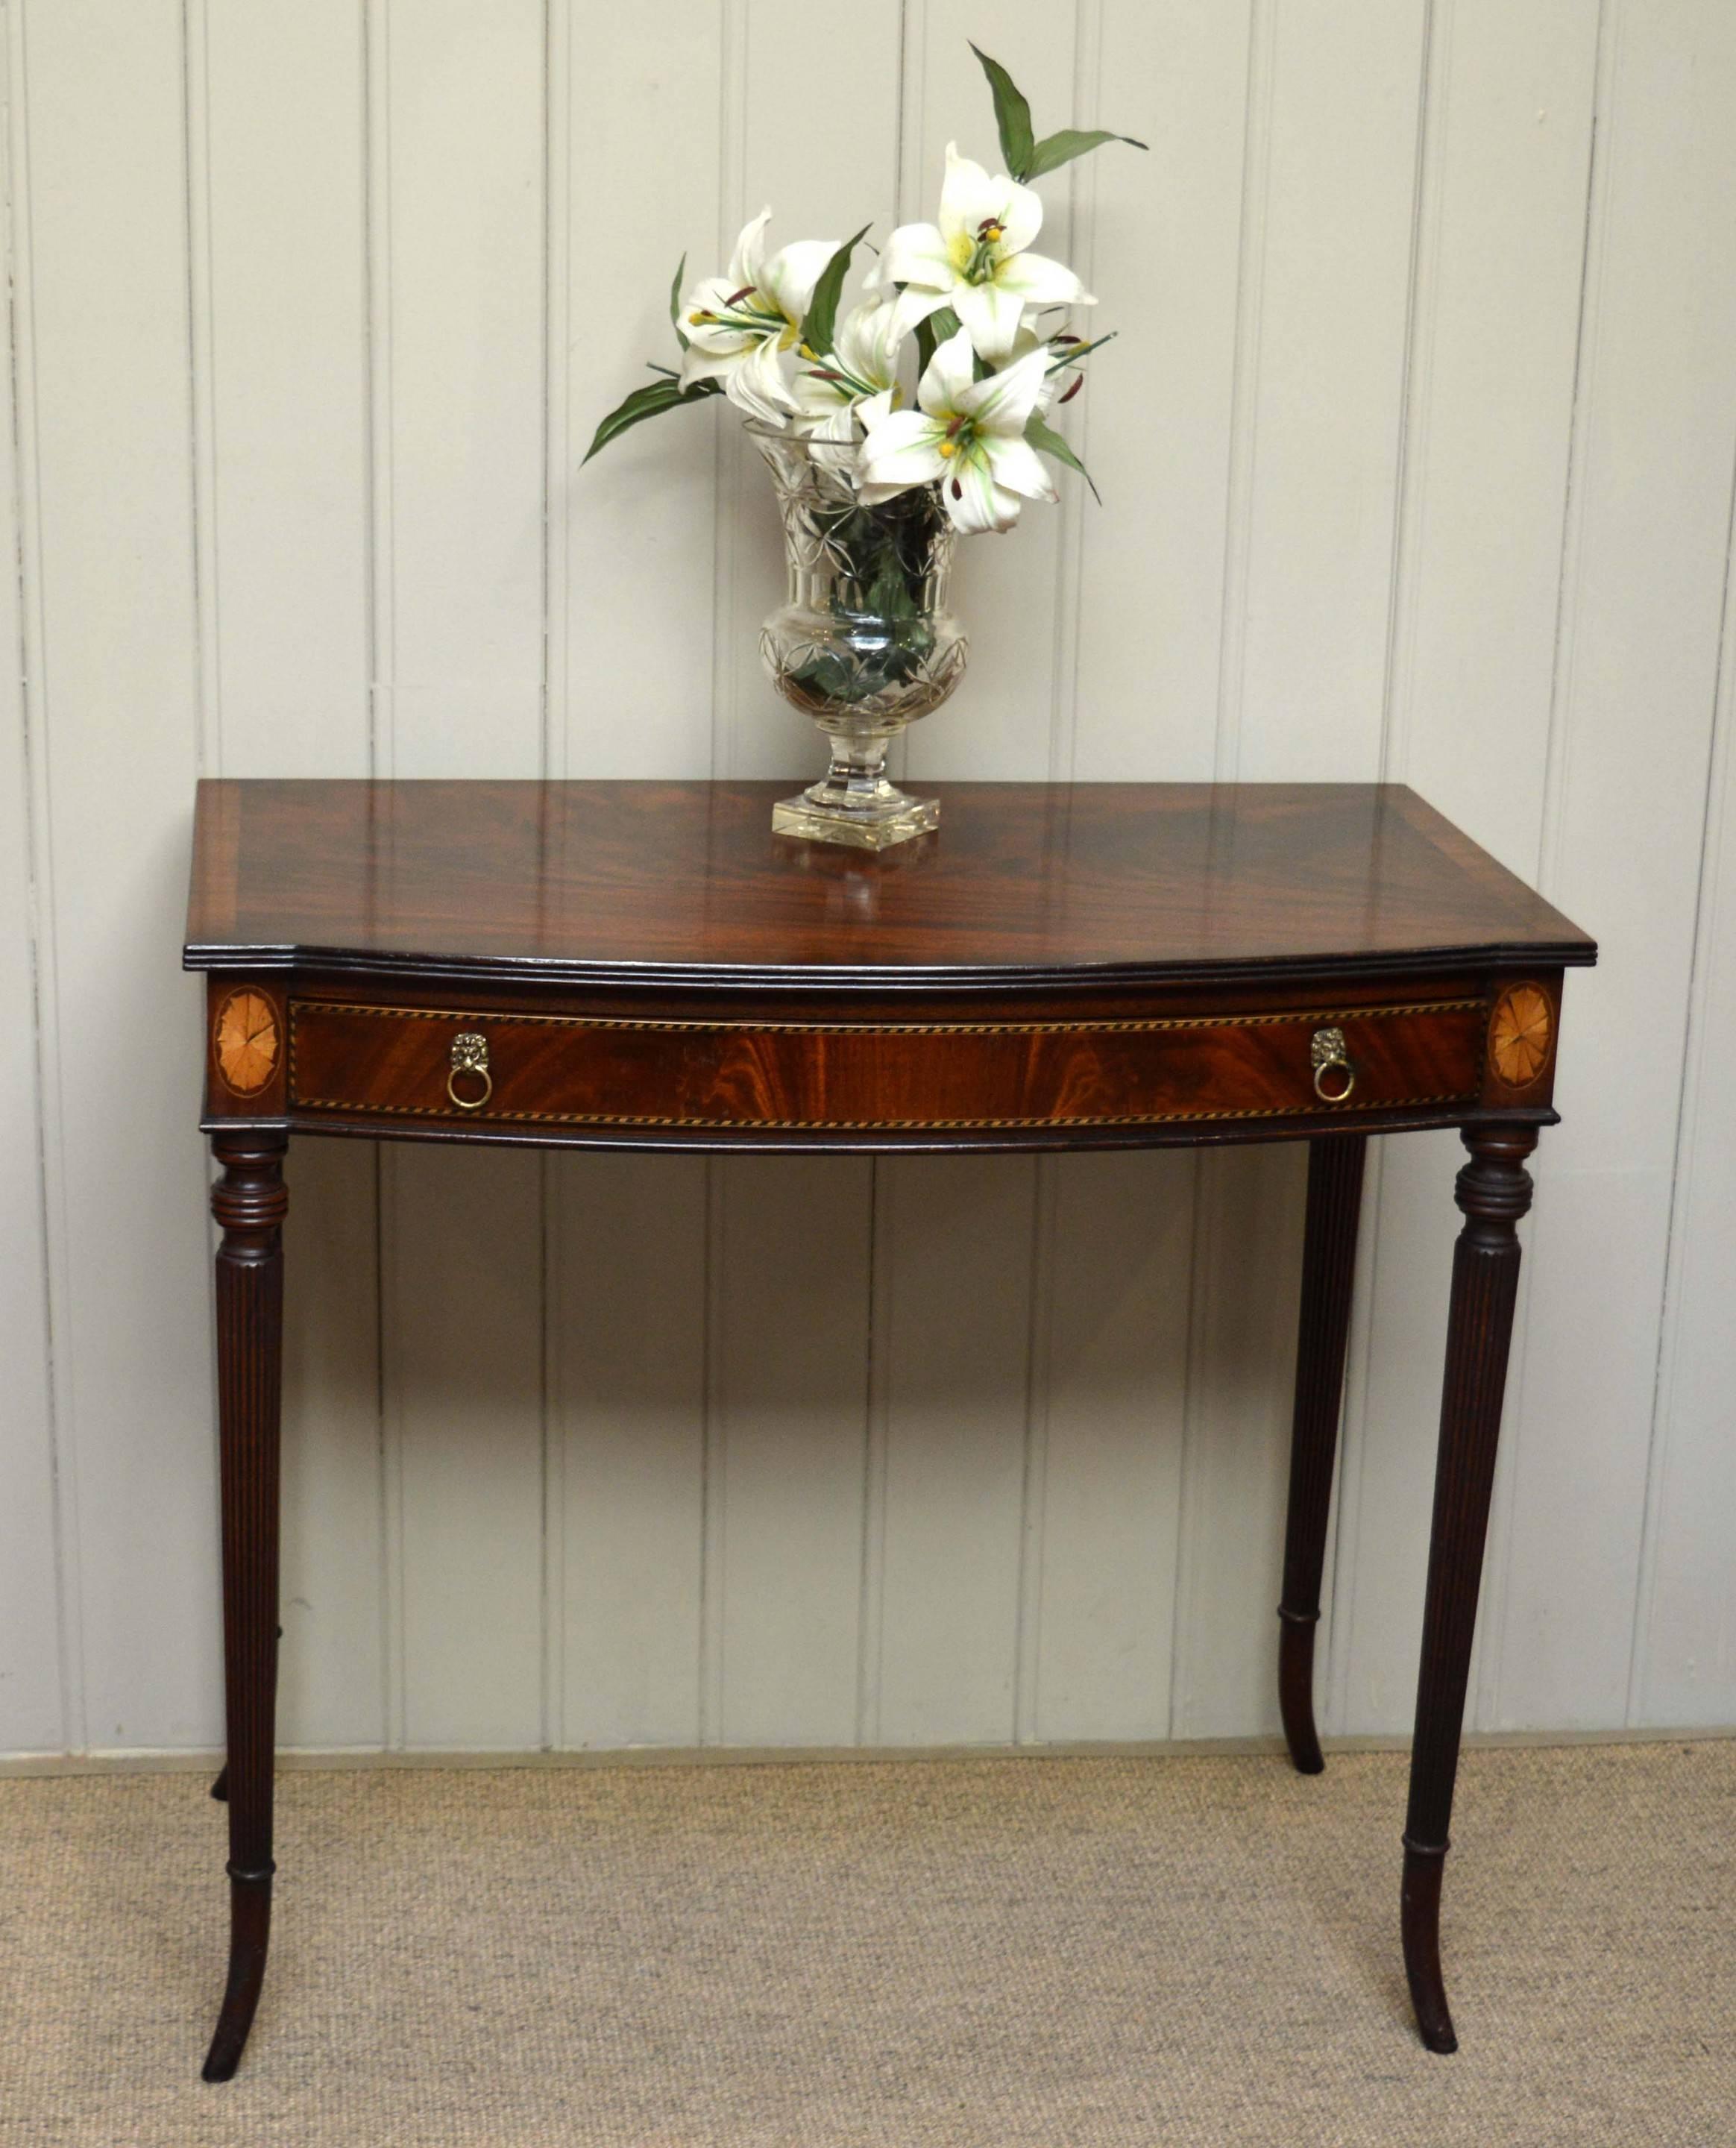 Mahogany inlaid demilune table having a single inlaid drawer raised on reeded outsplayed legs.